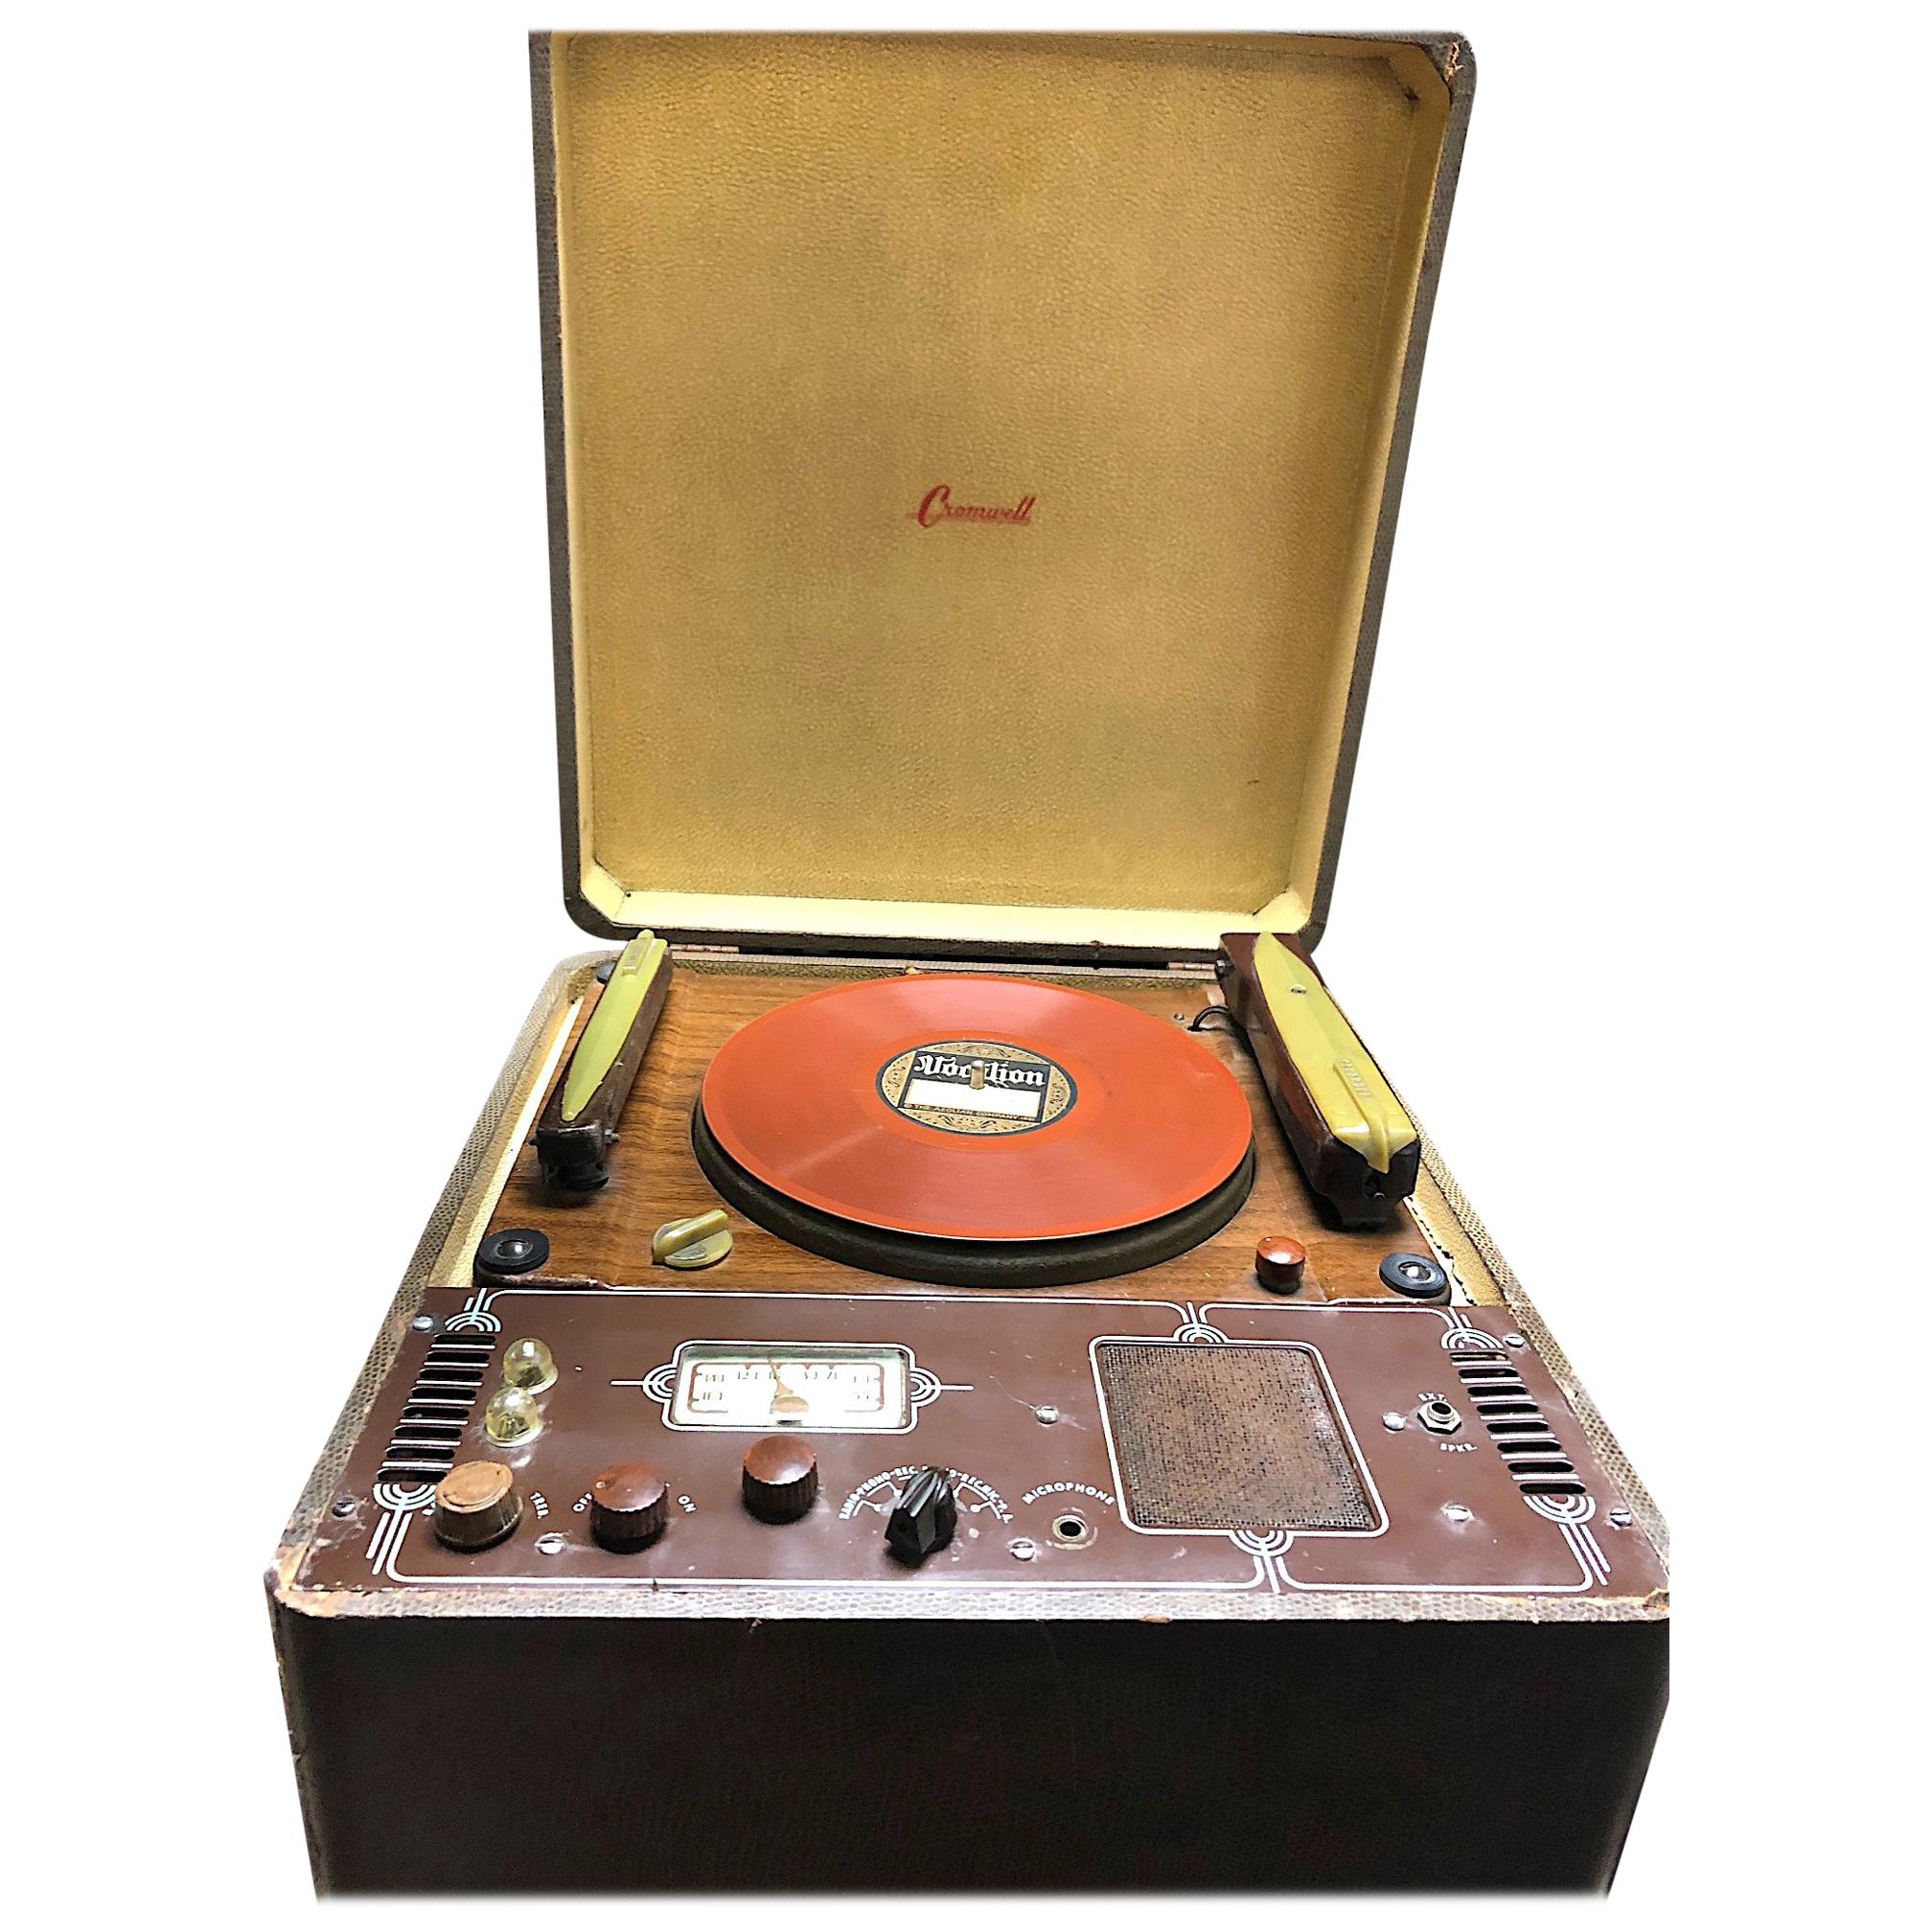 Cromwell Phonograph and Record Cutting Lathe circa 1938, Cosmetics Restored For Sale